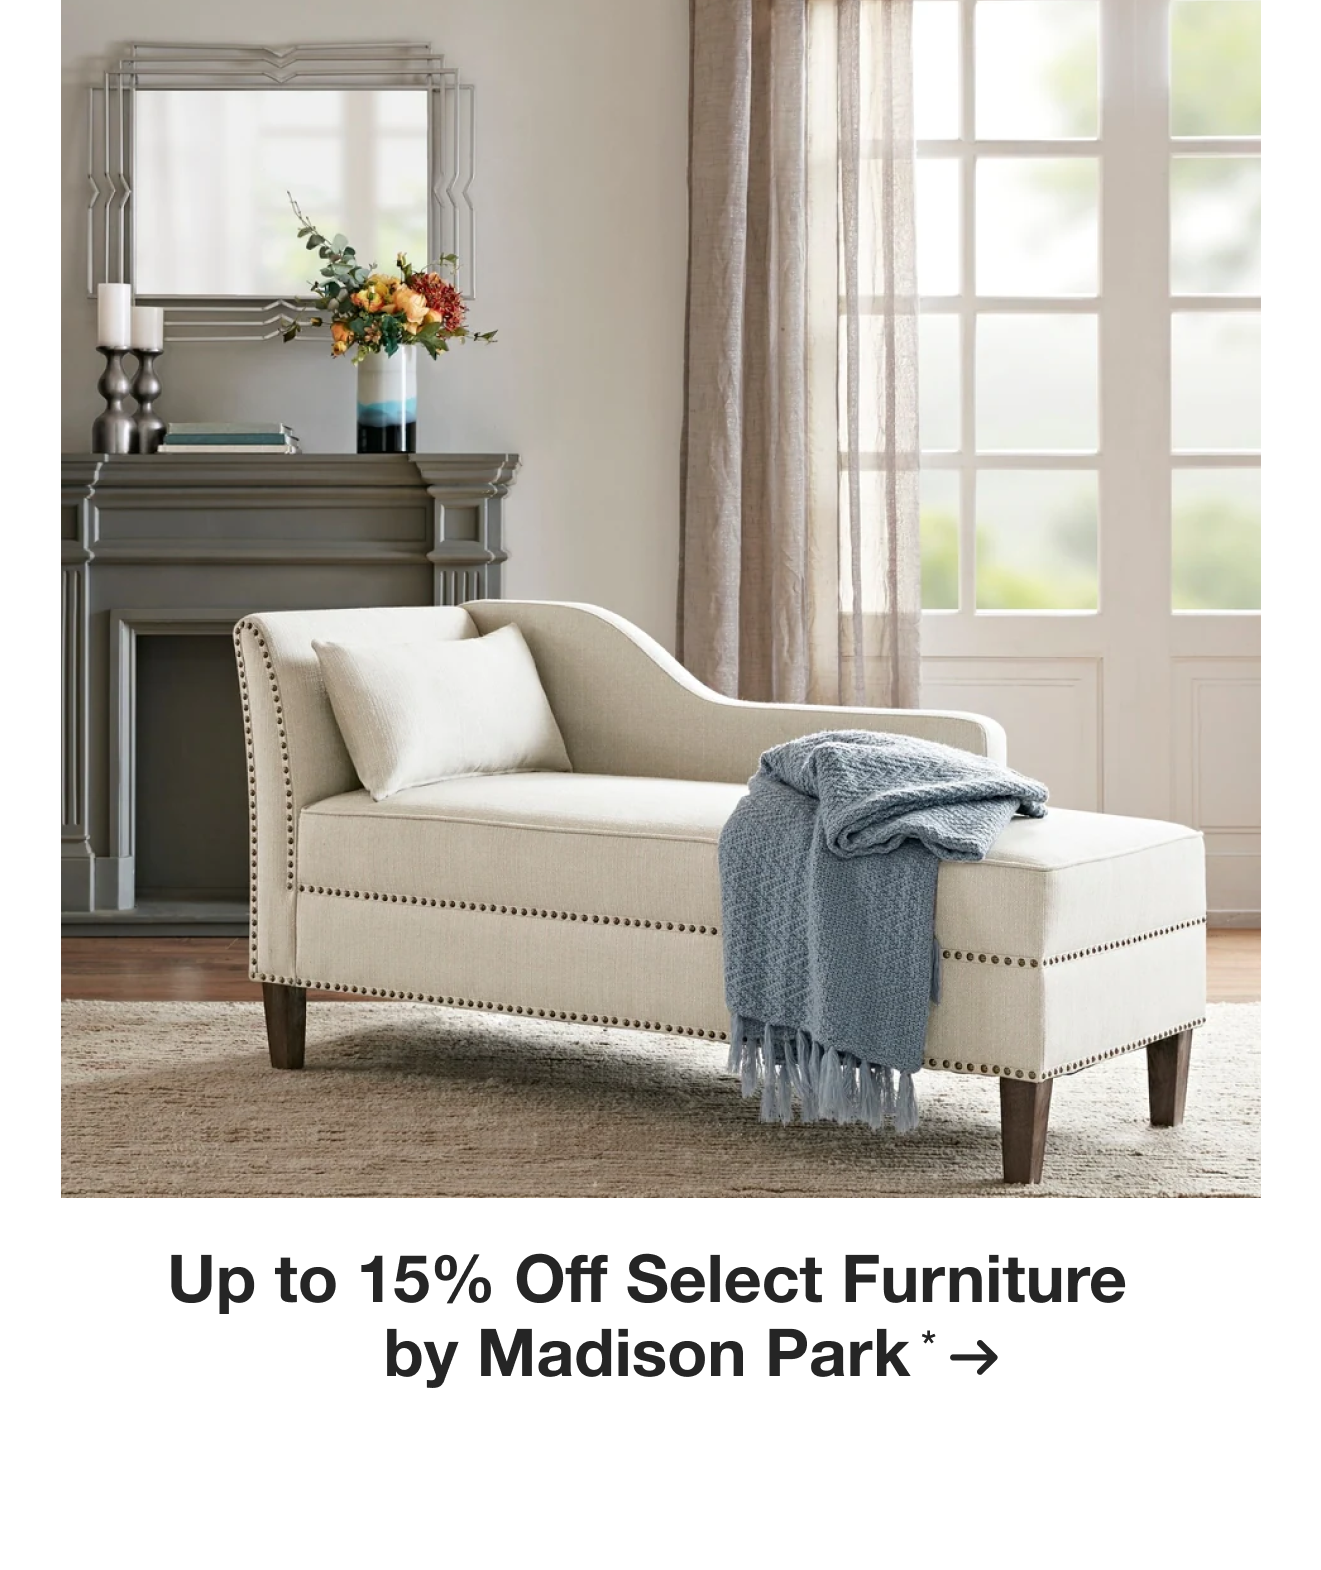 Up to 15% Off Select Furniture by Madison Park*